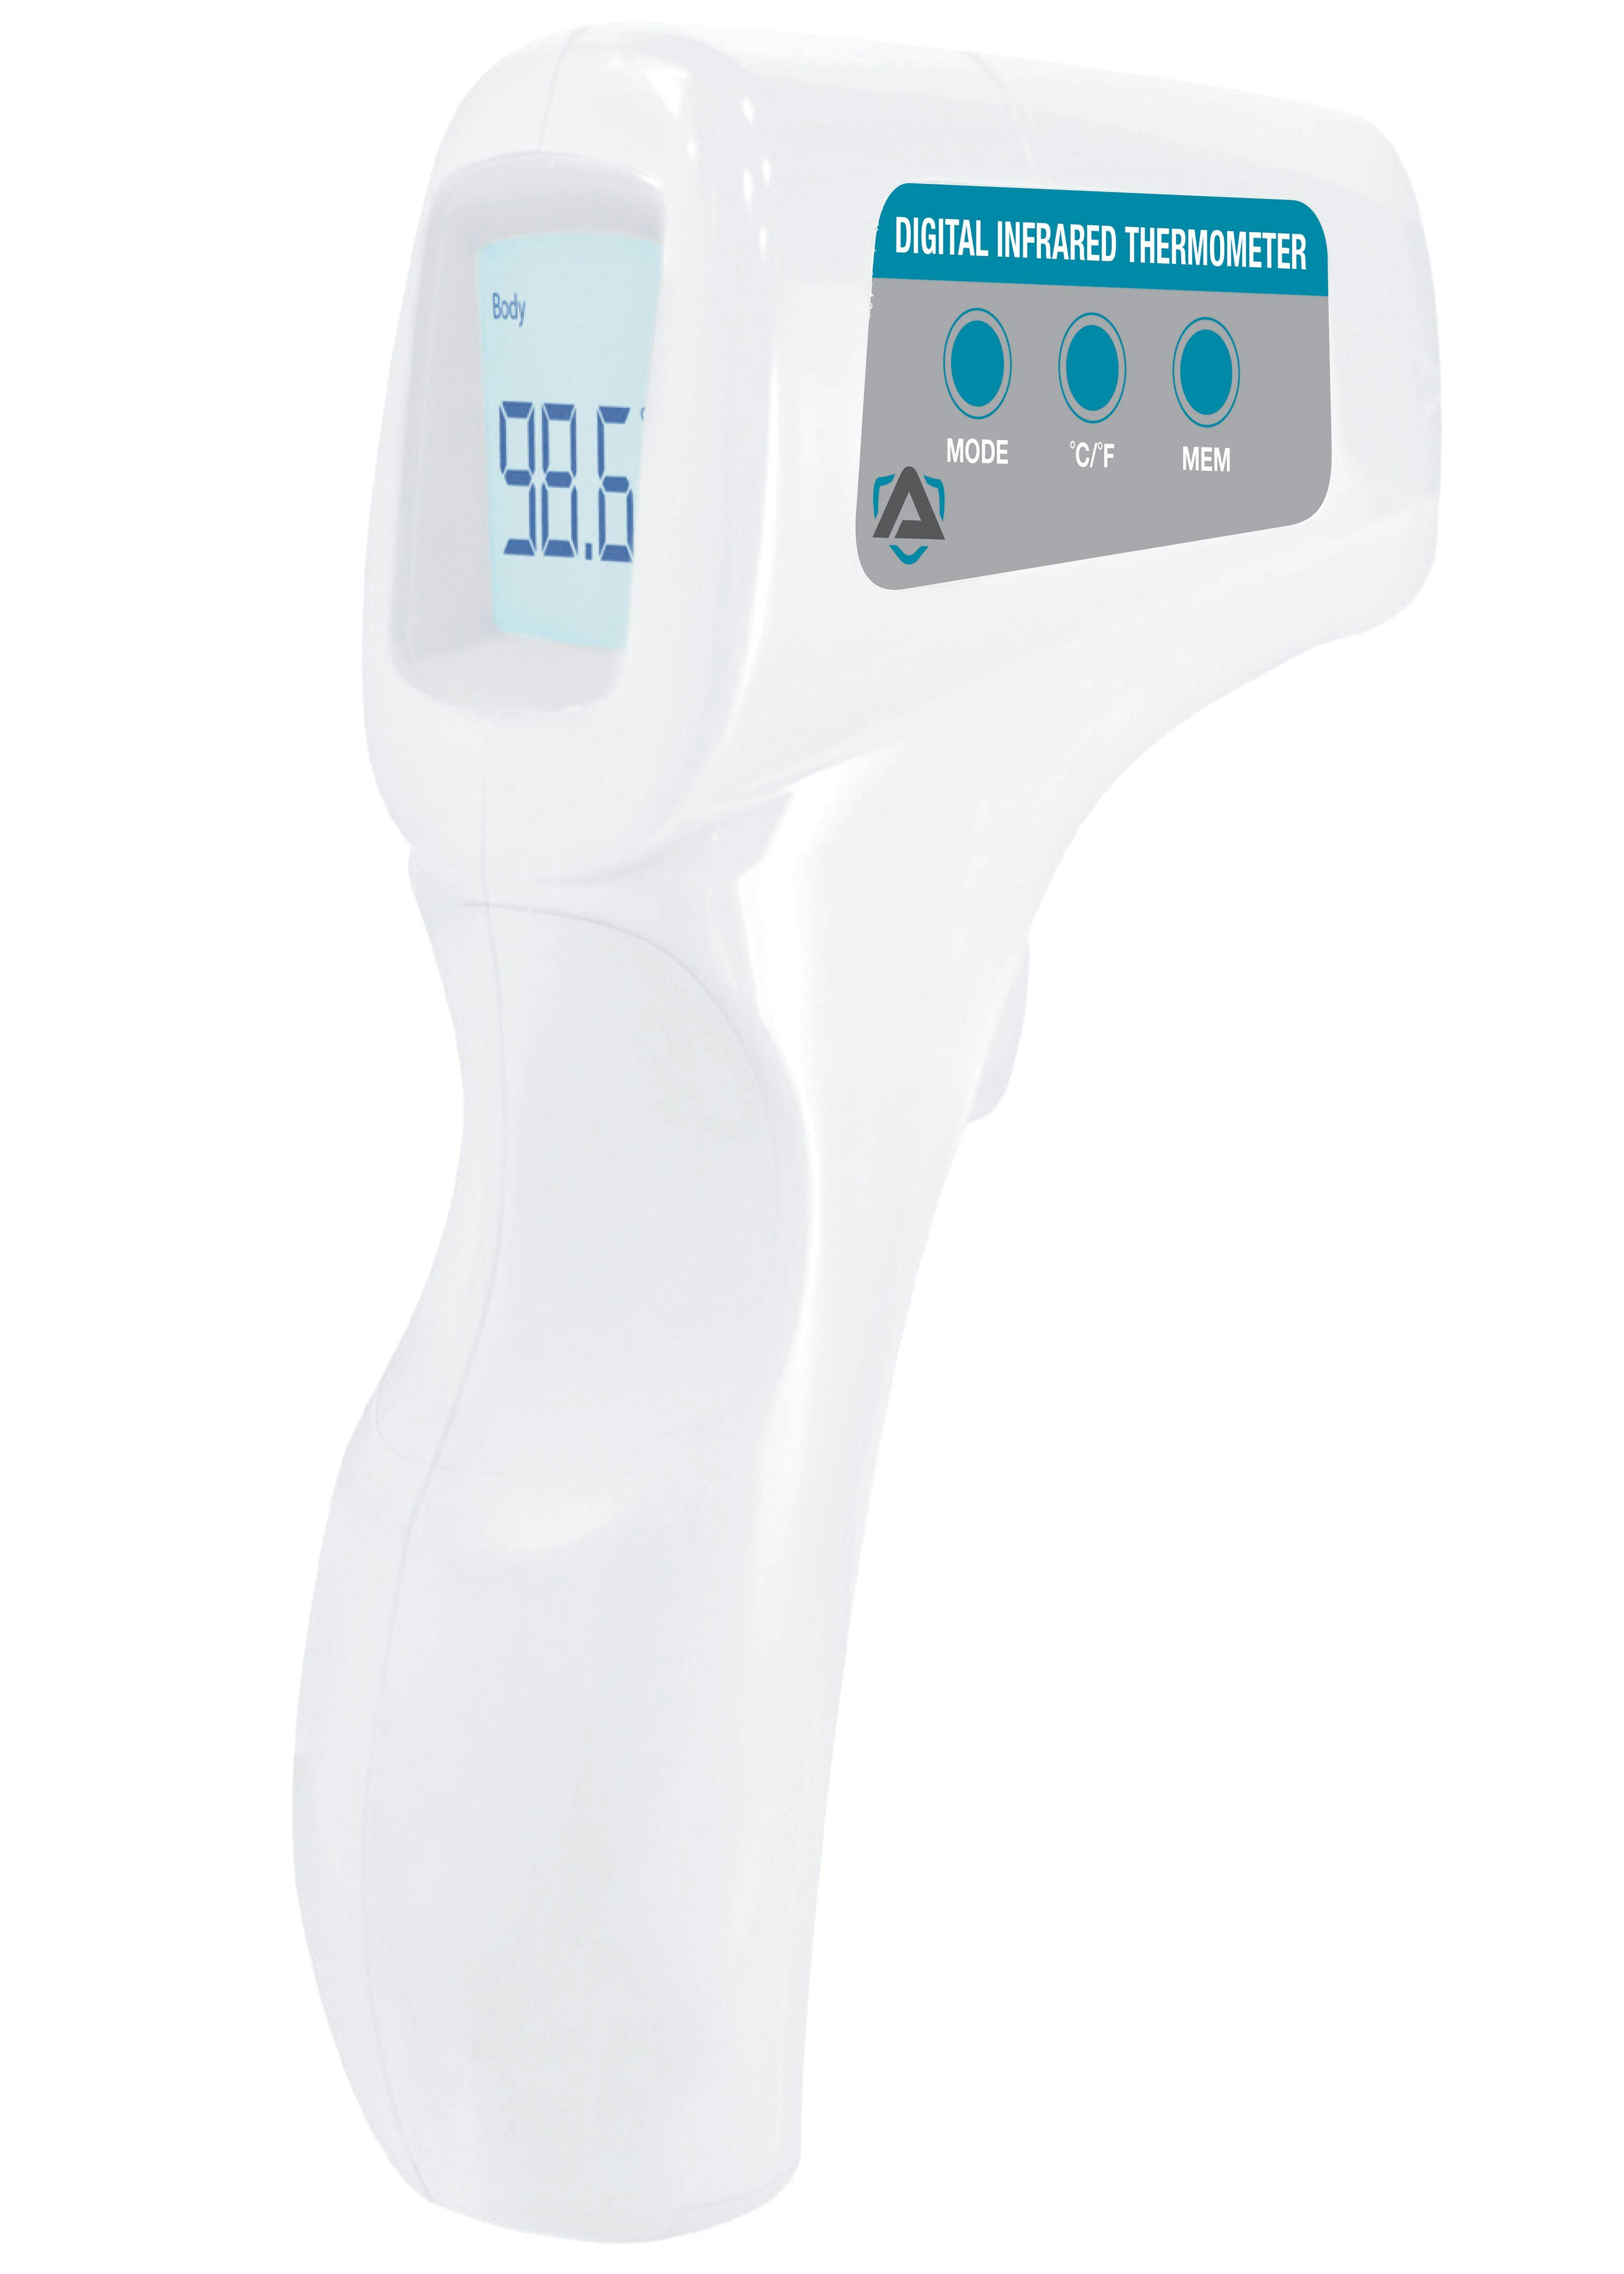  Non-contact thermometers are in demand as dental practices reopen after the pandemic. 